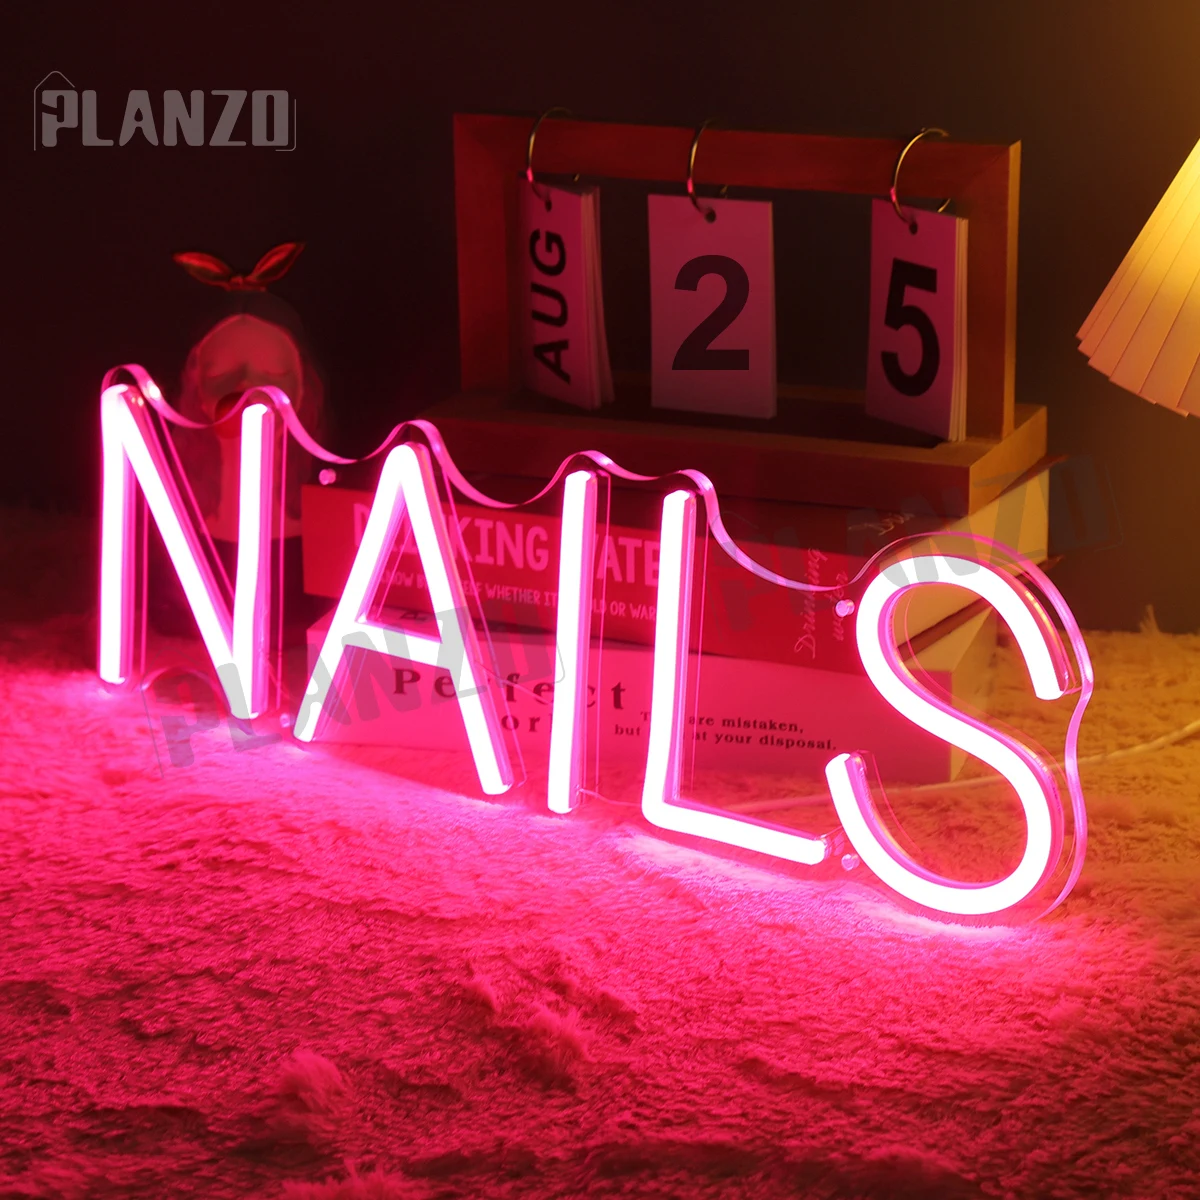 NAILS Neon Sign Led Pink Neon Light Up Signs for Wall Decor Usb Neon Lights Salon Beauty Room Decor Lights Bedroom Shop Indoor